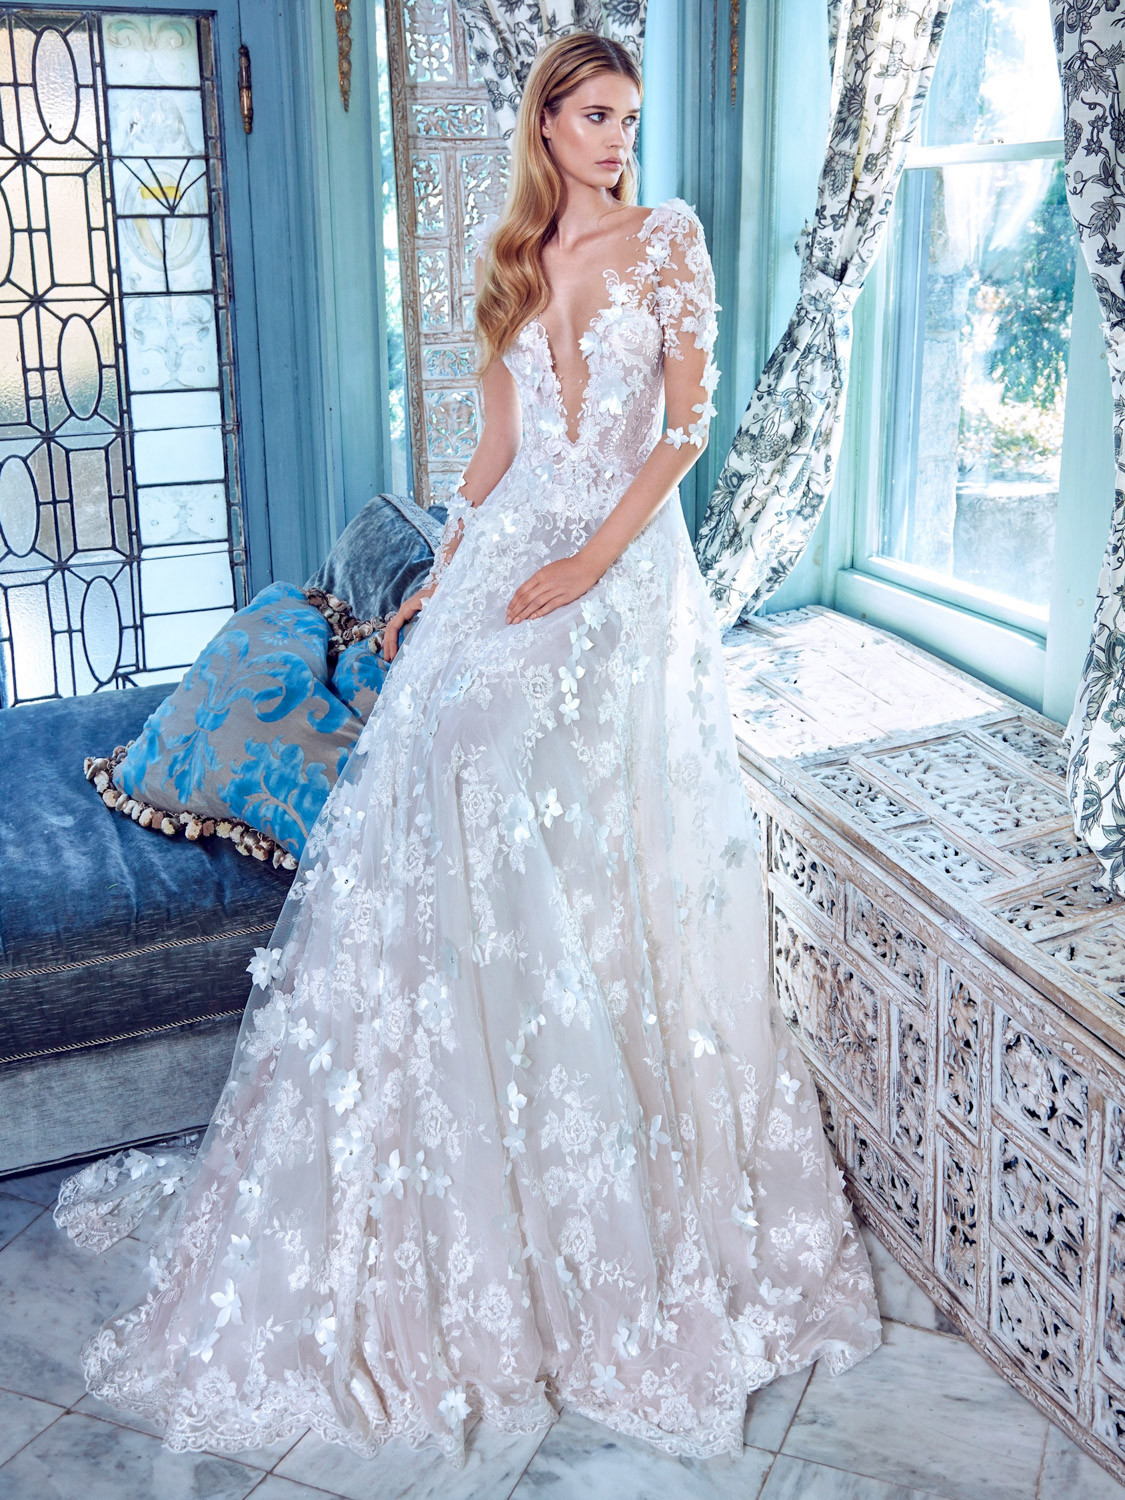 Wedding Gown Designers List
 4 Most Beautiful Wedding Gown Designers for Chic Brides